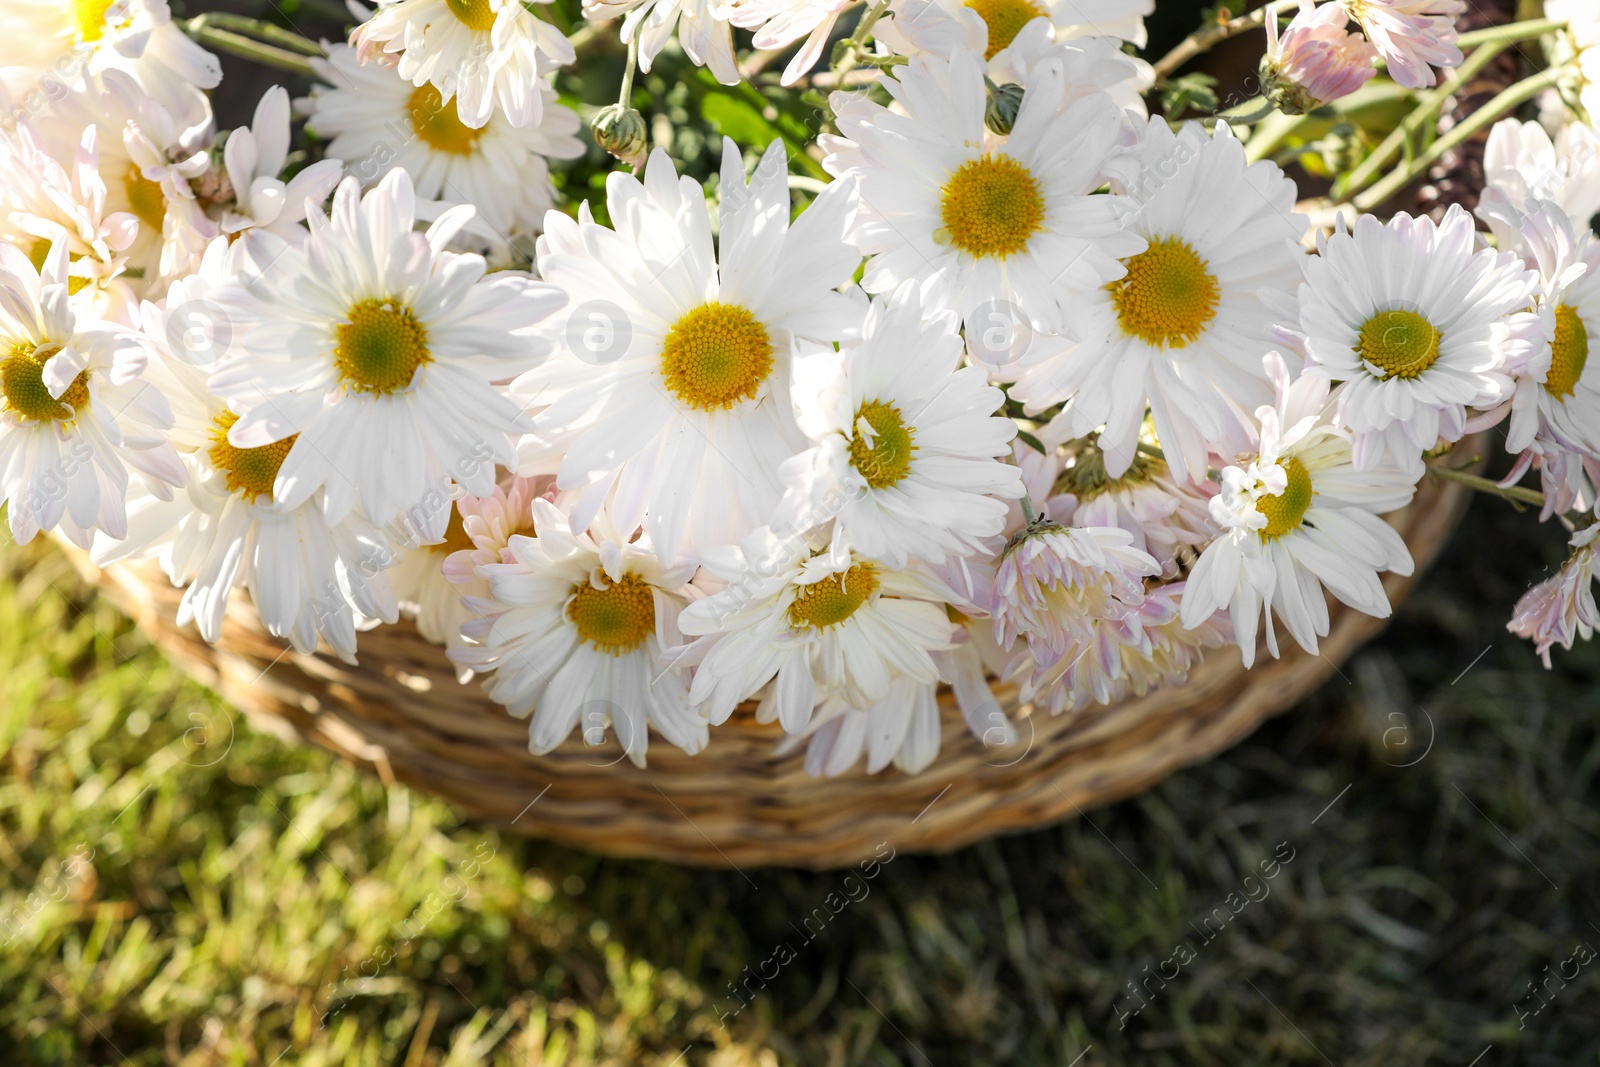 Photo of Beautiful wild flowers in wicker basket on green grass outdoors, above view